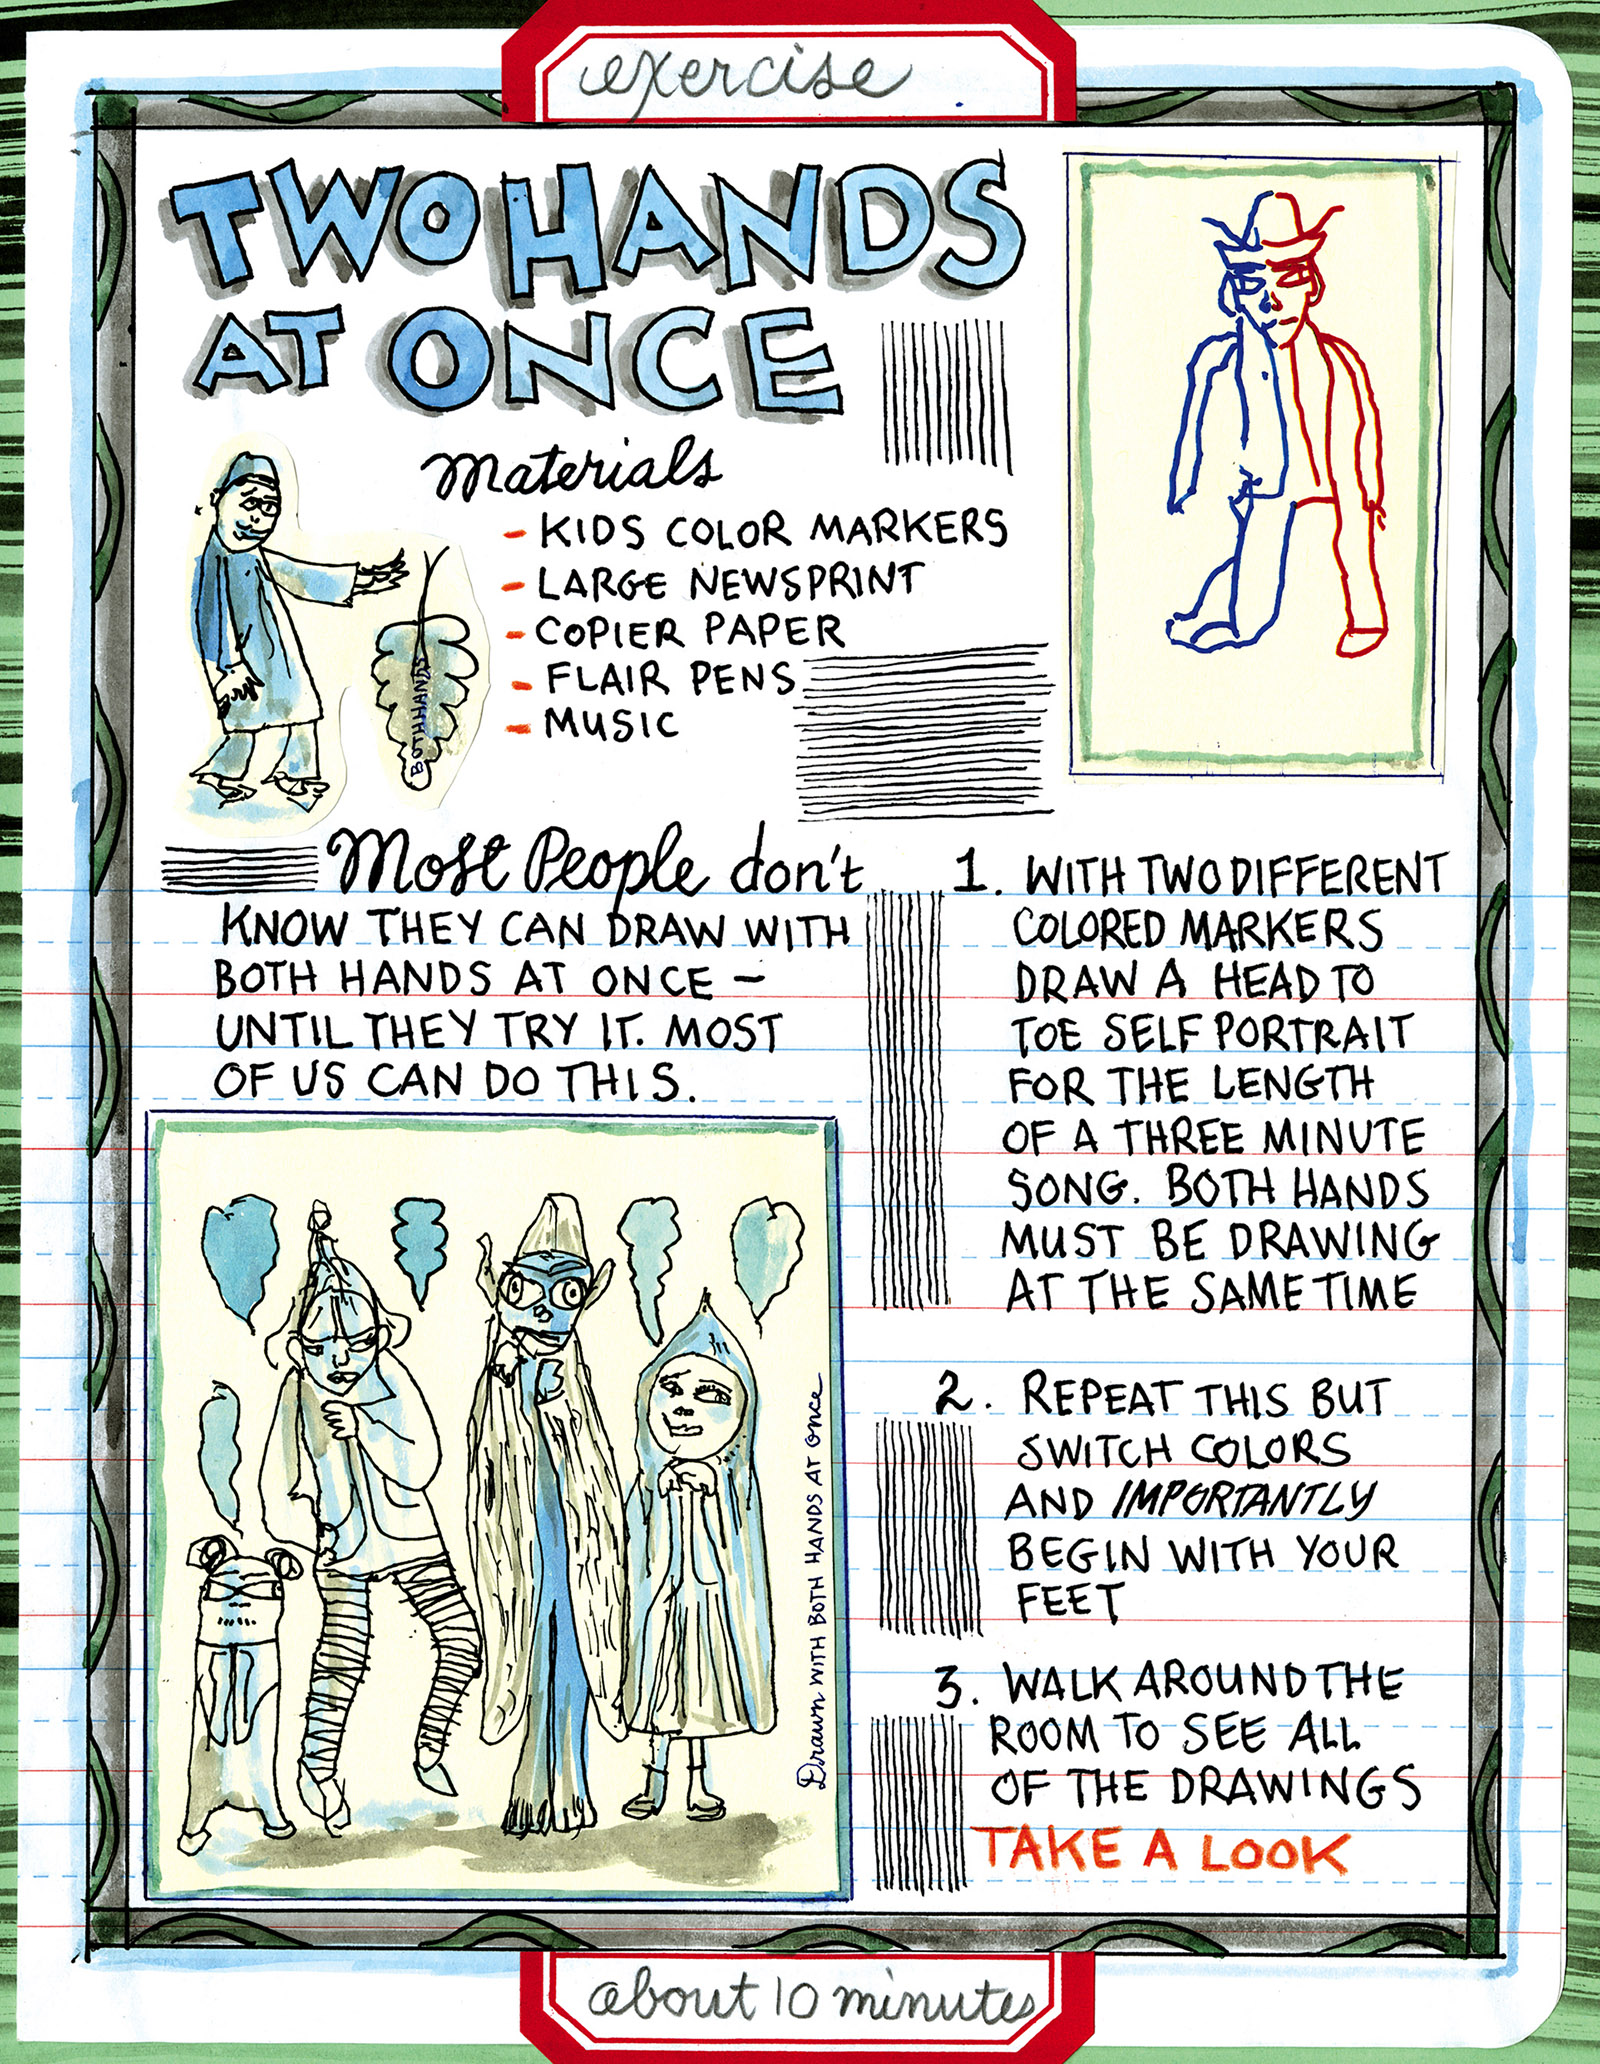 A page from Making Comics by Lynda Barry